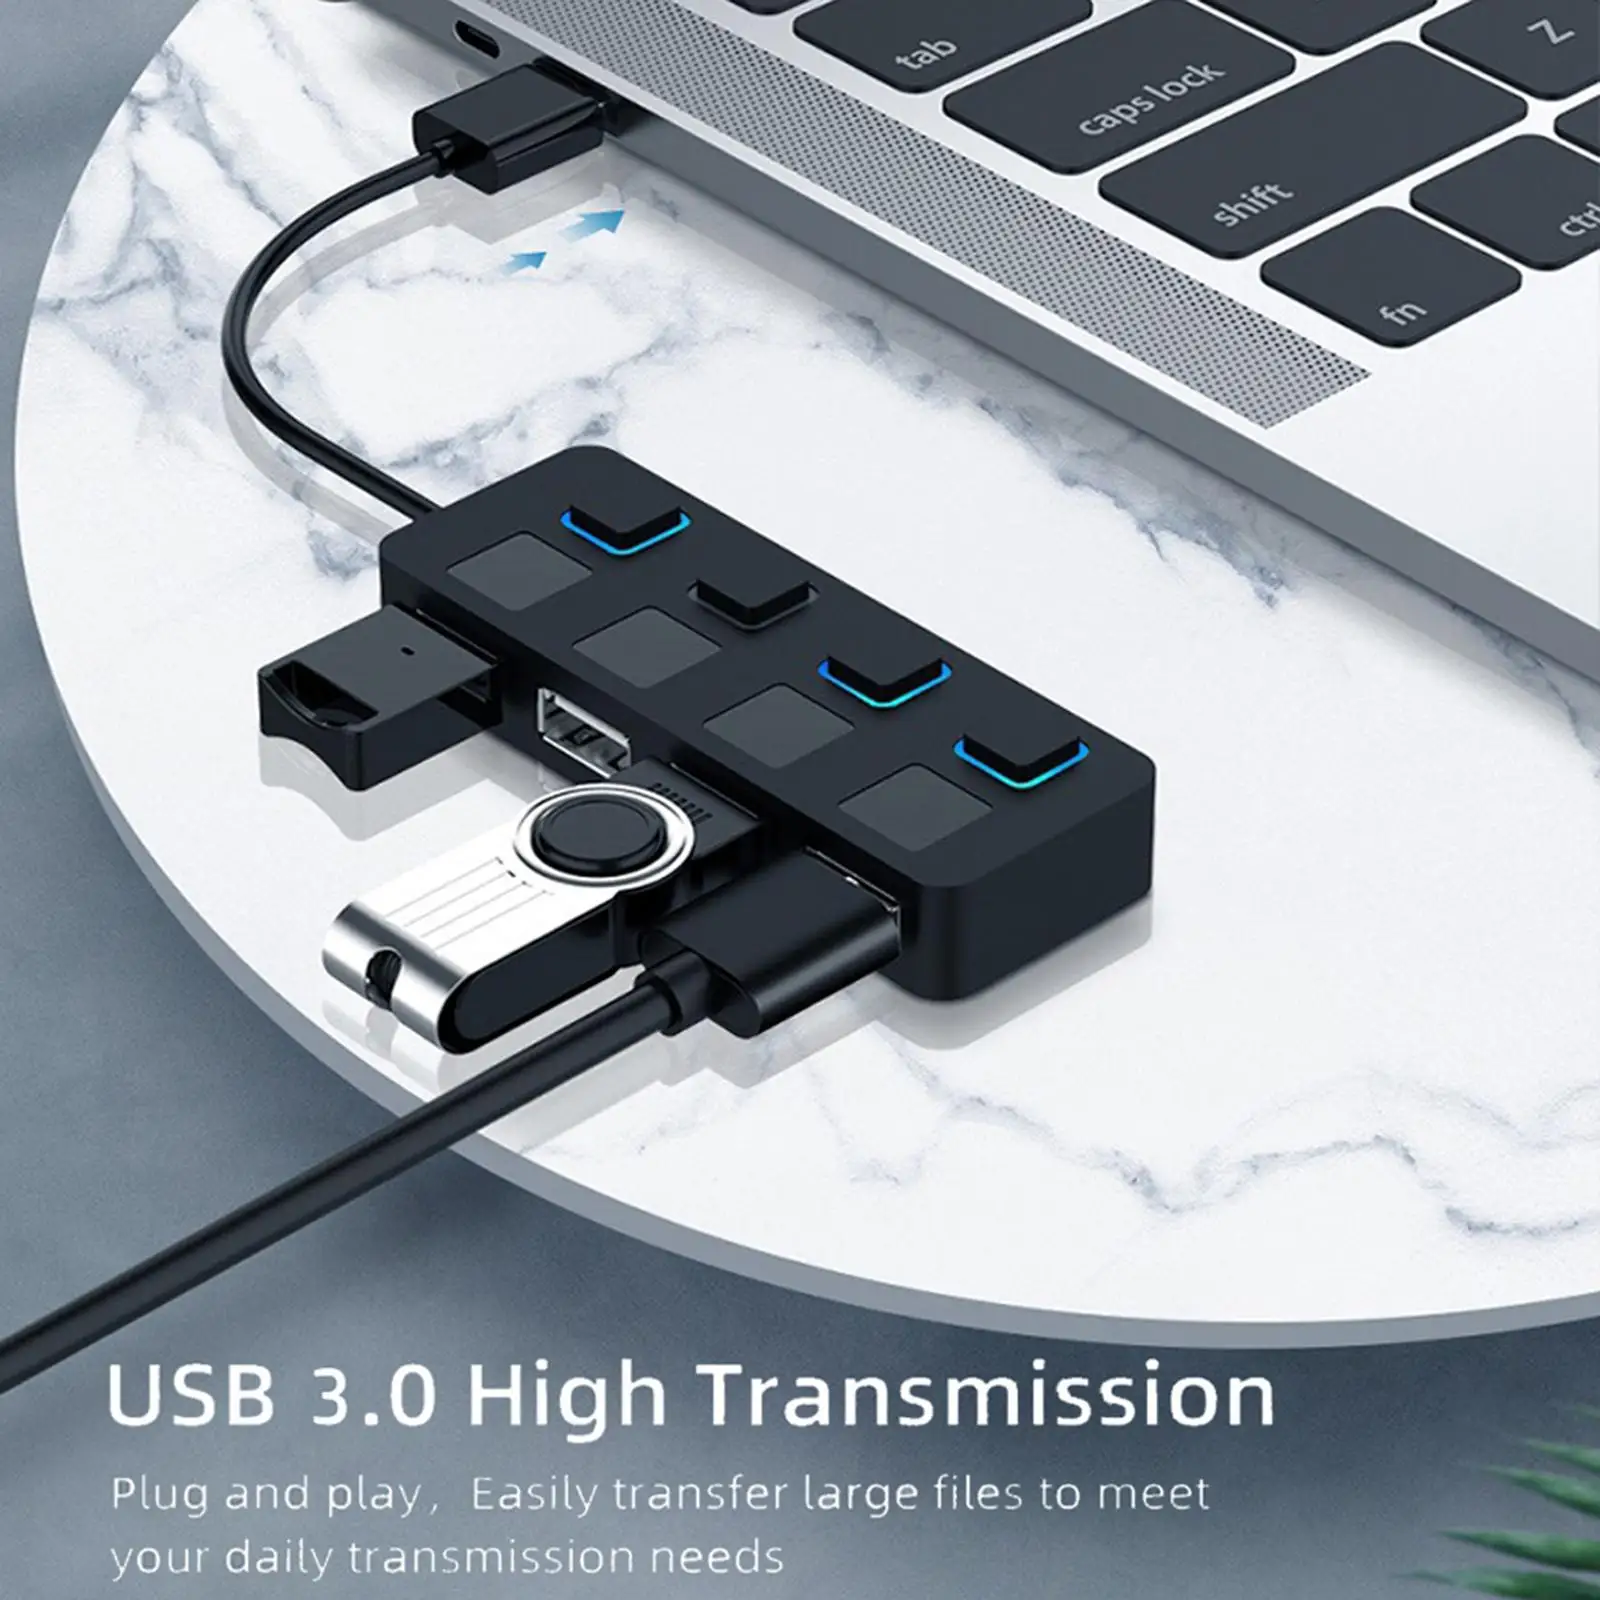 Slim 4 Port USB 3.0 Hub with Individual LED Power Switches Compact Data USB Hub for MacBook Mobile HDD for Mac Mini PC for iMac